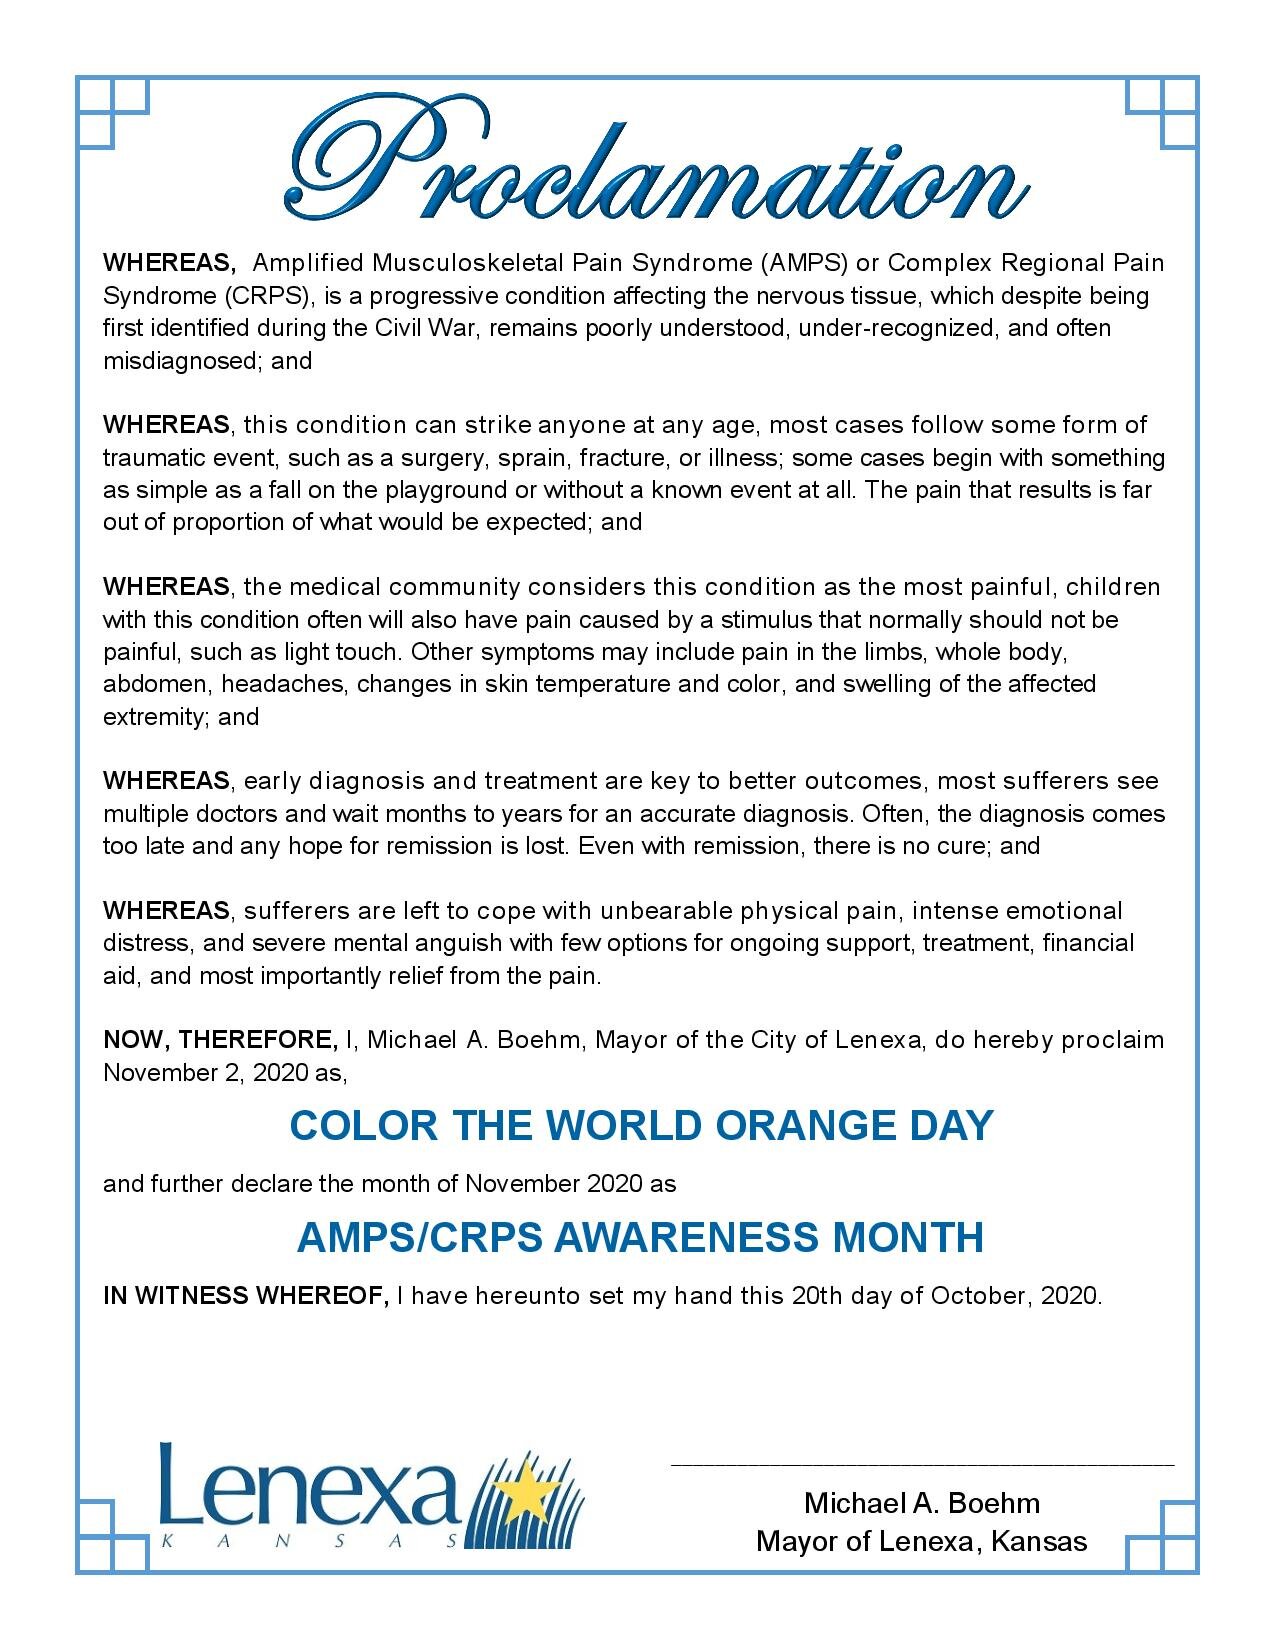 Oct-AMPS-CRPS-Color-World-Orange-Day-and-Awareness-Month-page-001.jpg